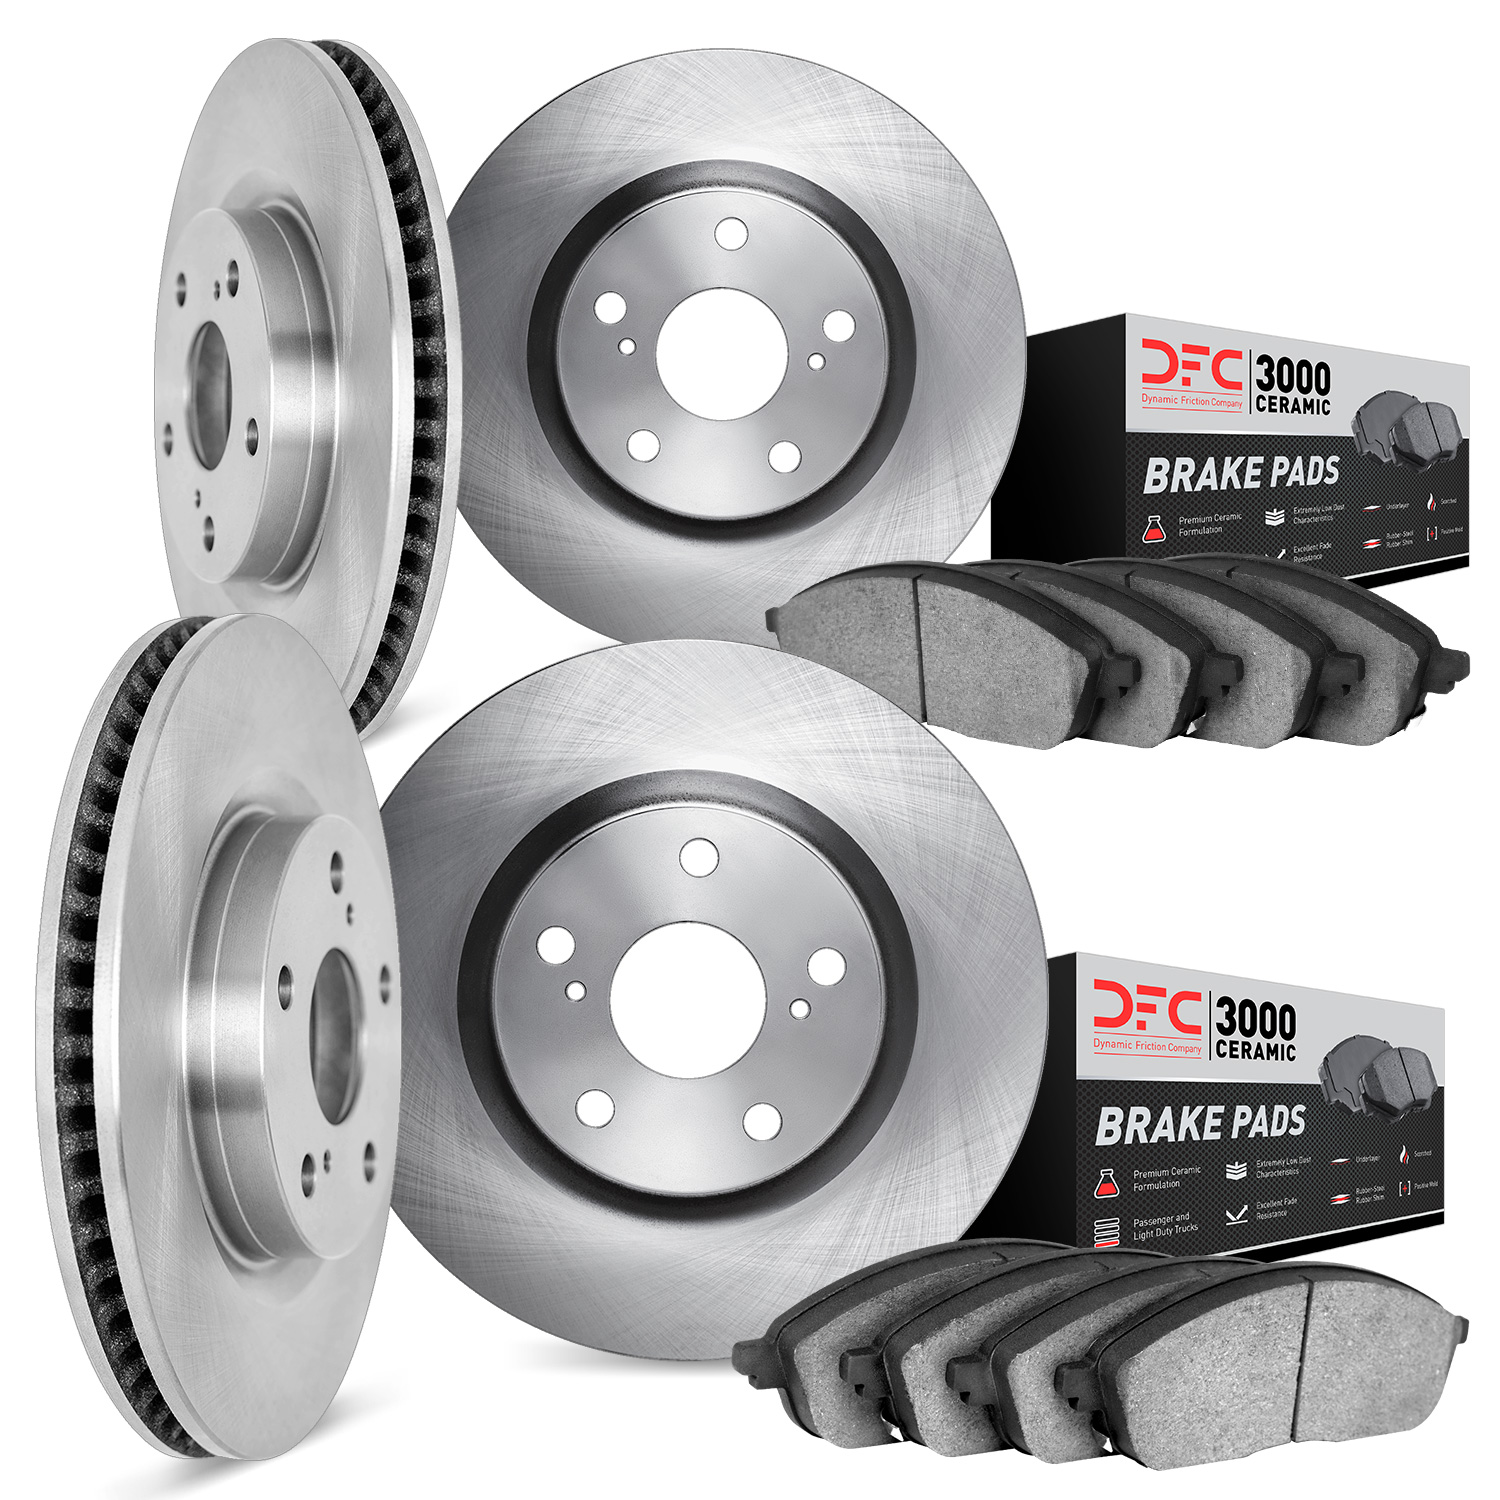 6304-76043 Brake Rotors with 3000-Series Ceramic Brake Pads Kit, 1998-2007 Lexus/Toyota/Scion, Position: Front and Rear